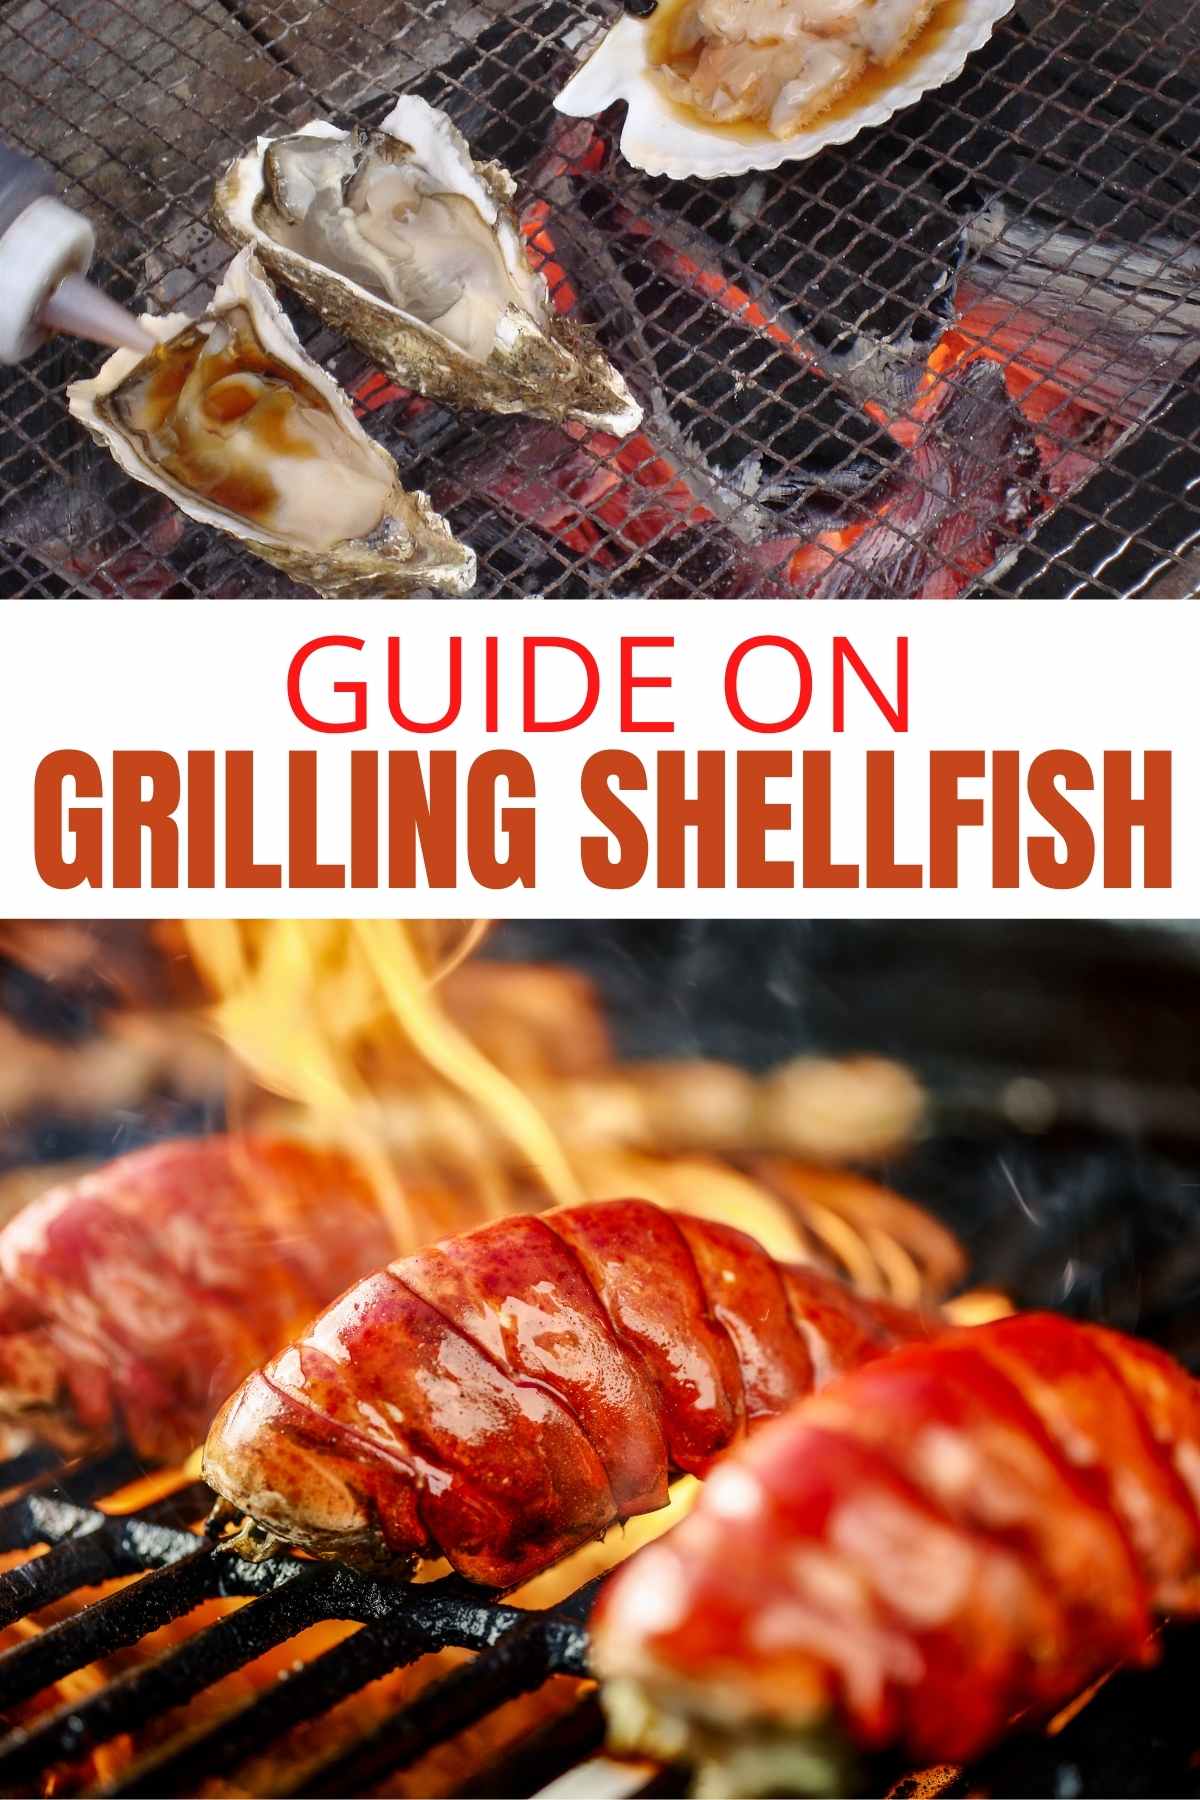 GUIDE ON GRILLING SHELLFISH